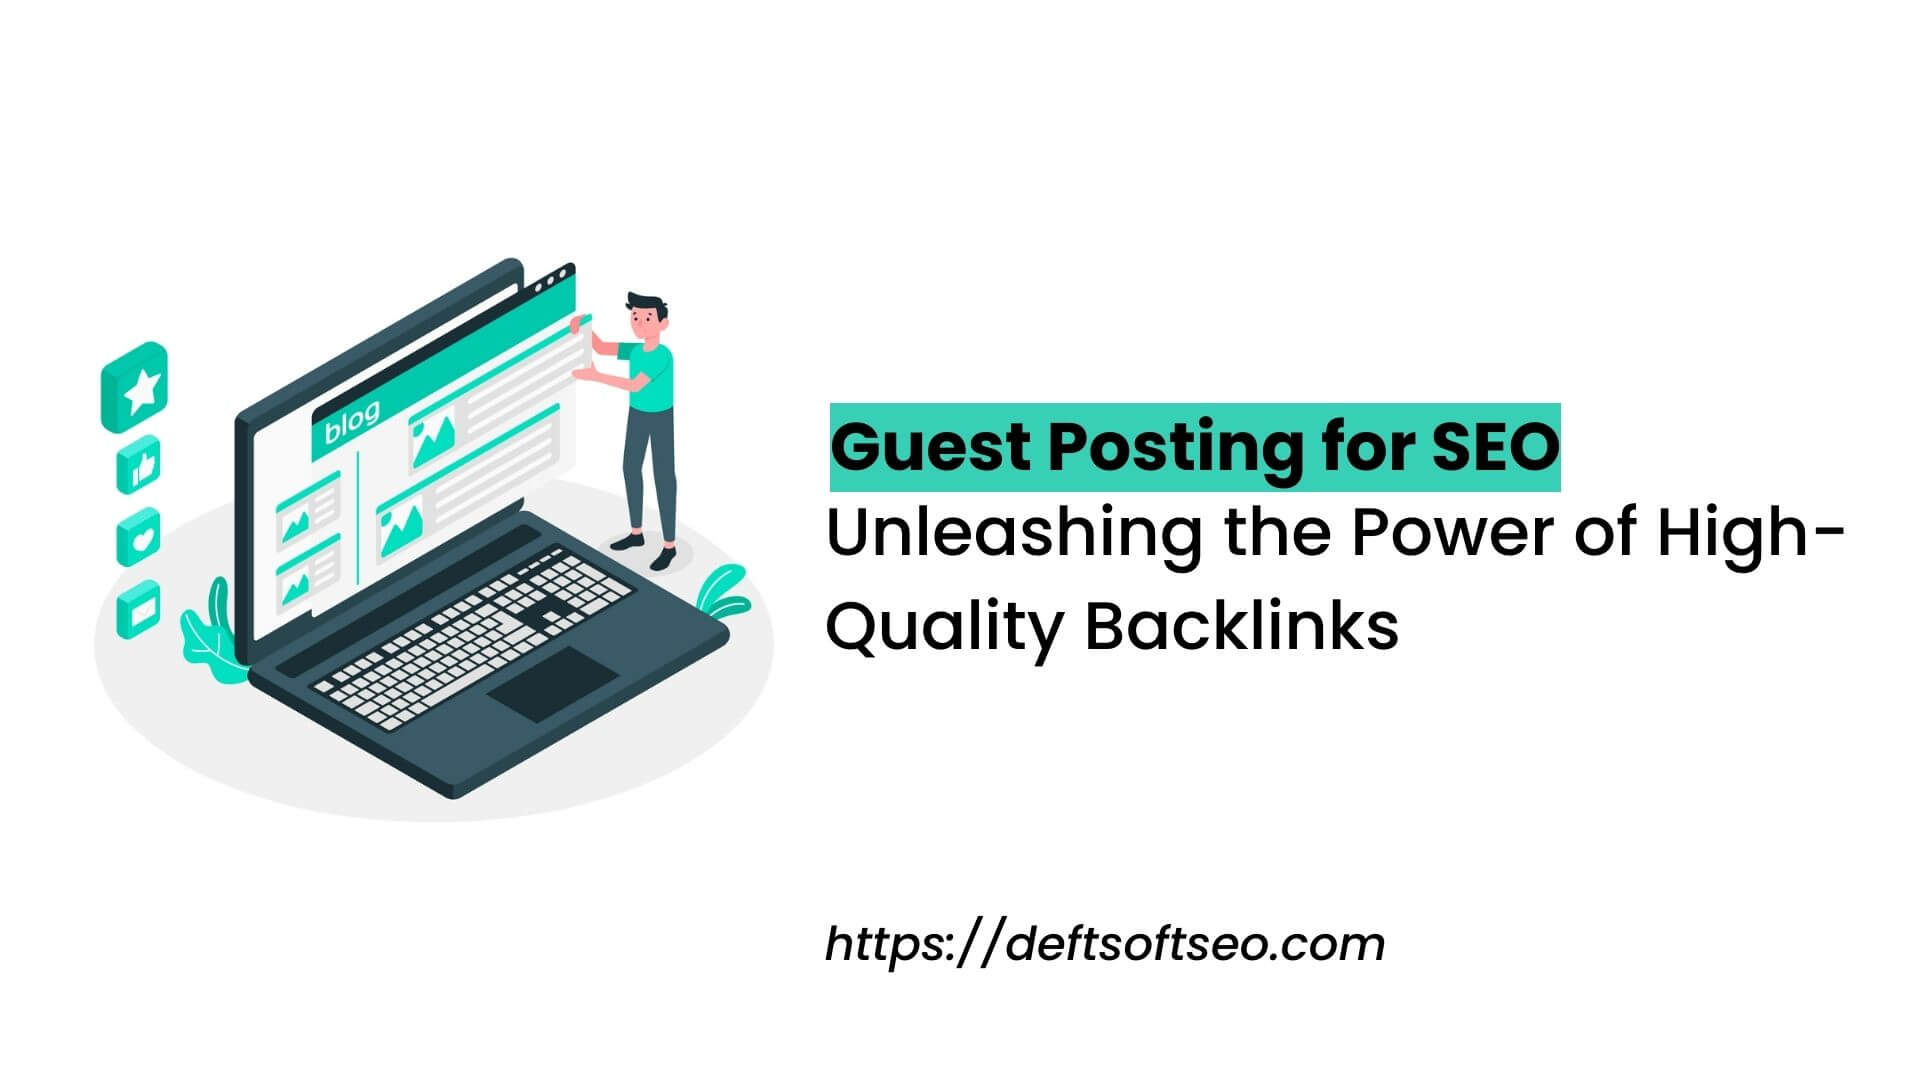 Guest Posting for SEO: Unleashing the Power of High-Quality Backlinks